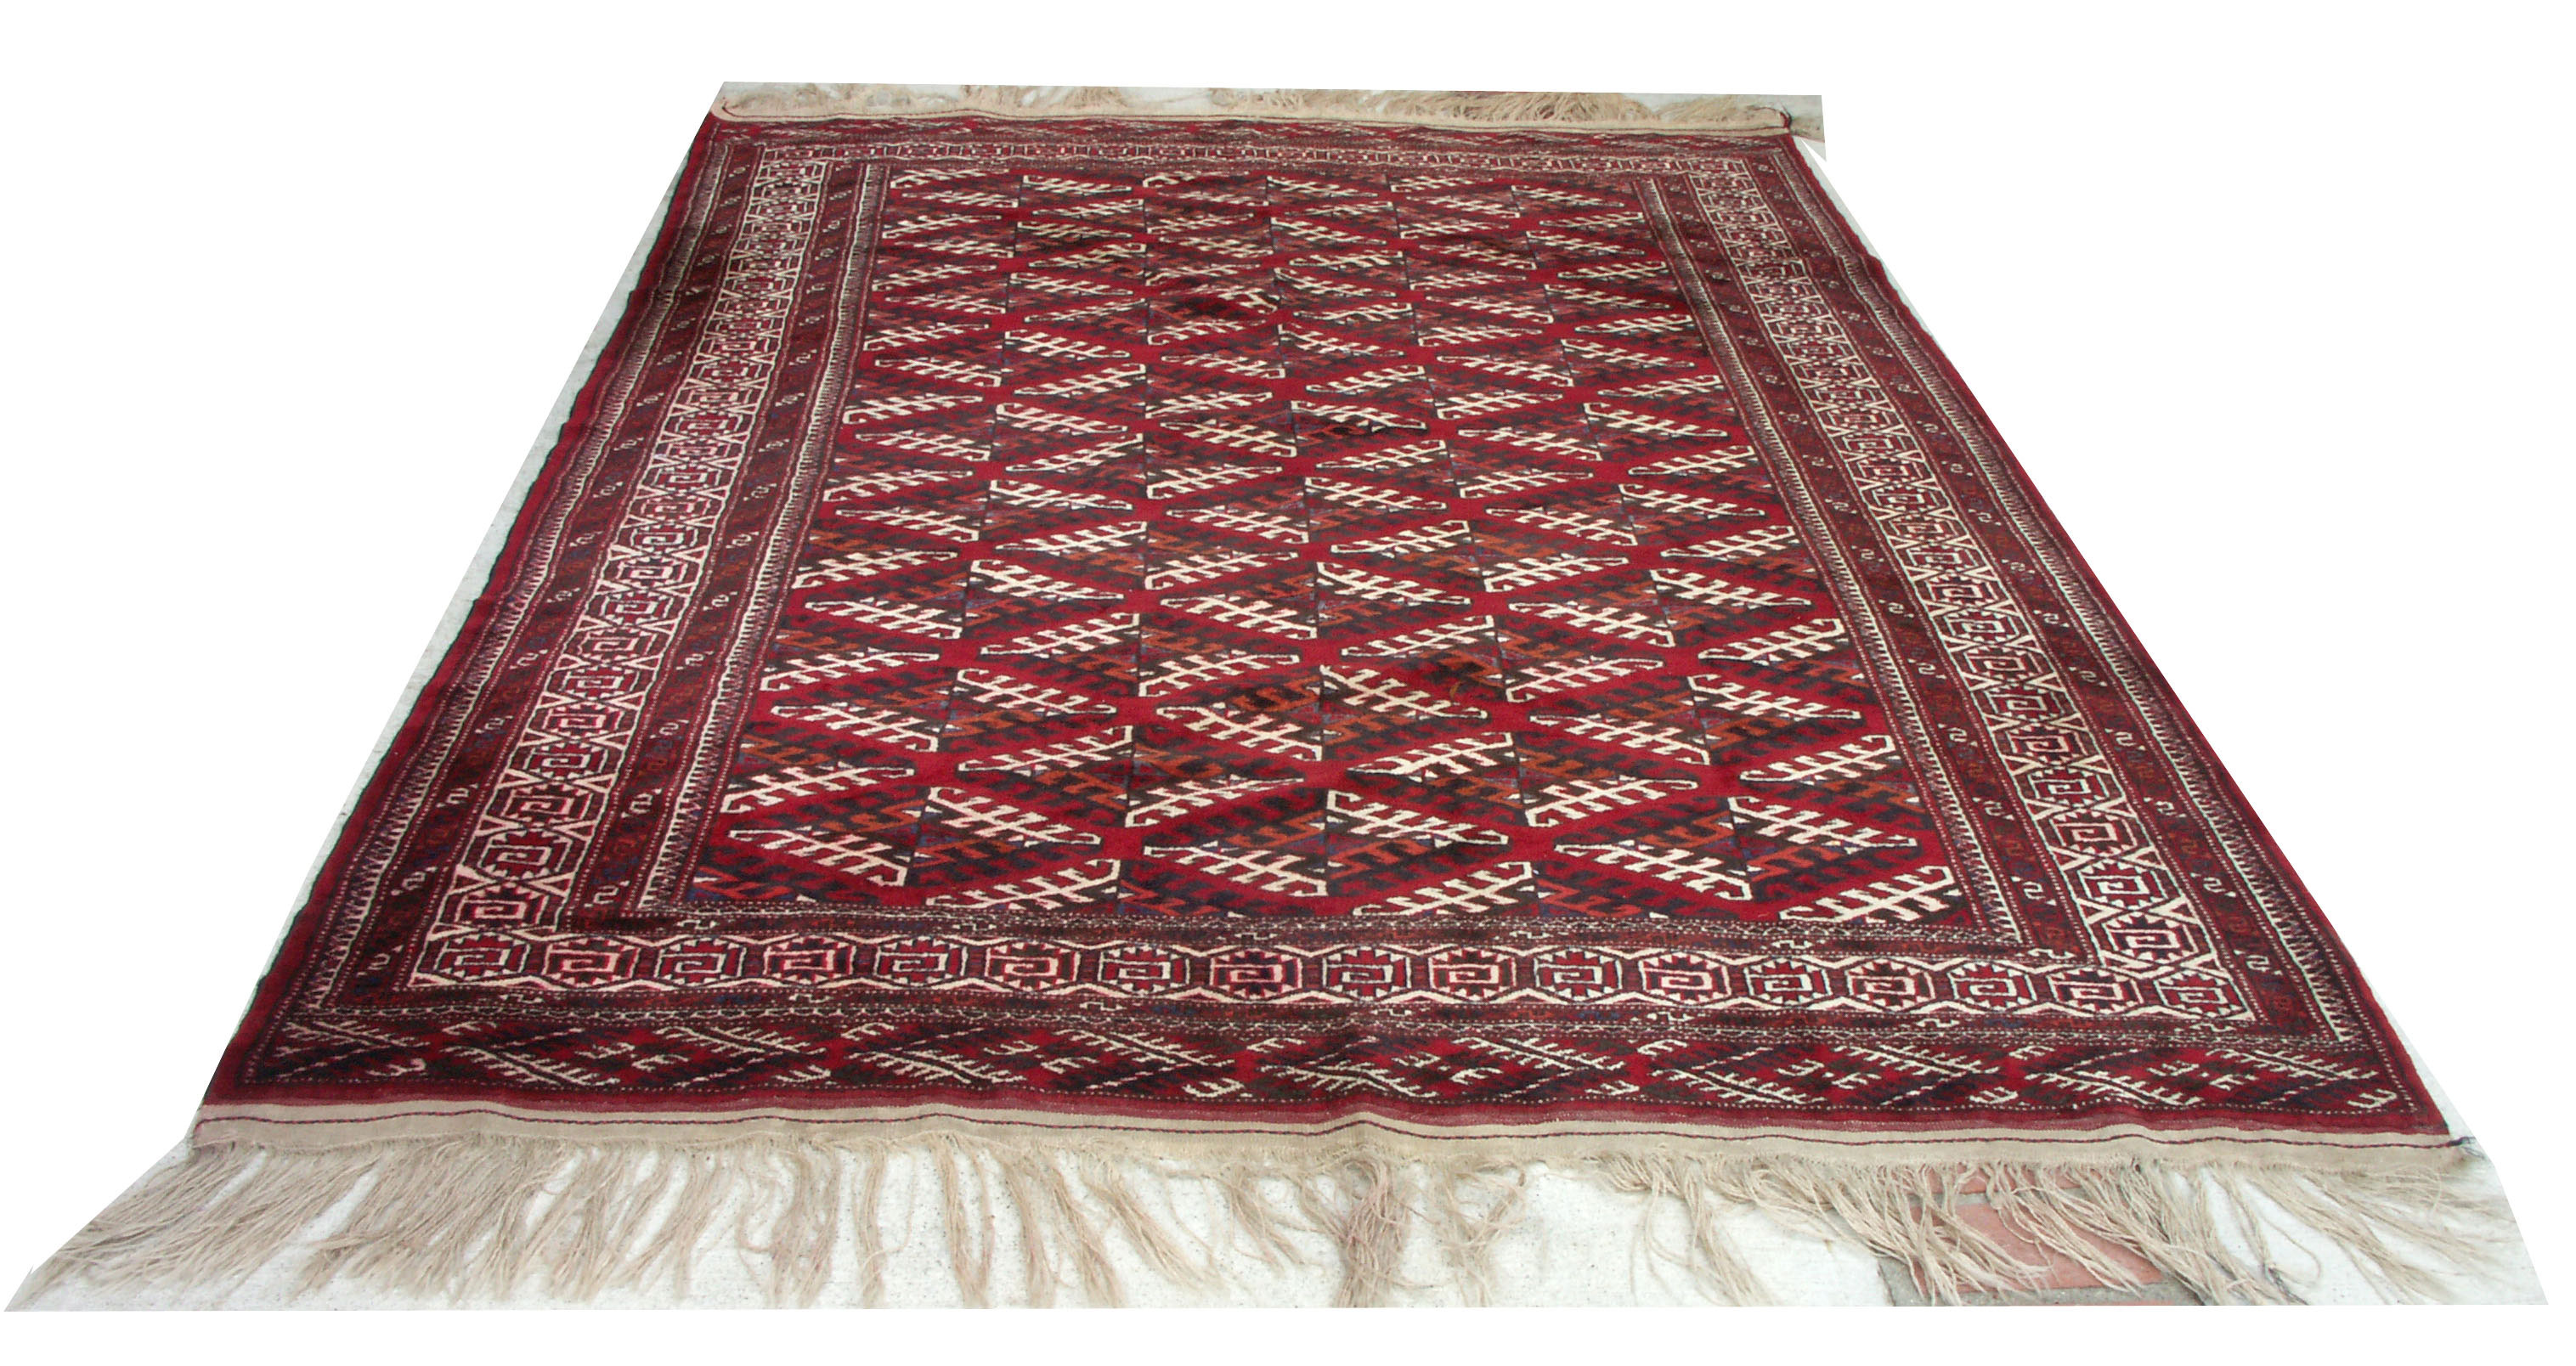 carpets and rugs x rugs products grobe oriental carpets and ethnic arts WNPKFZH